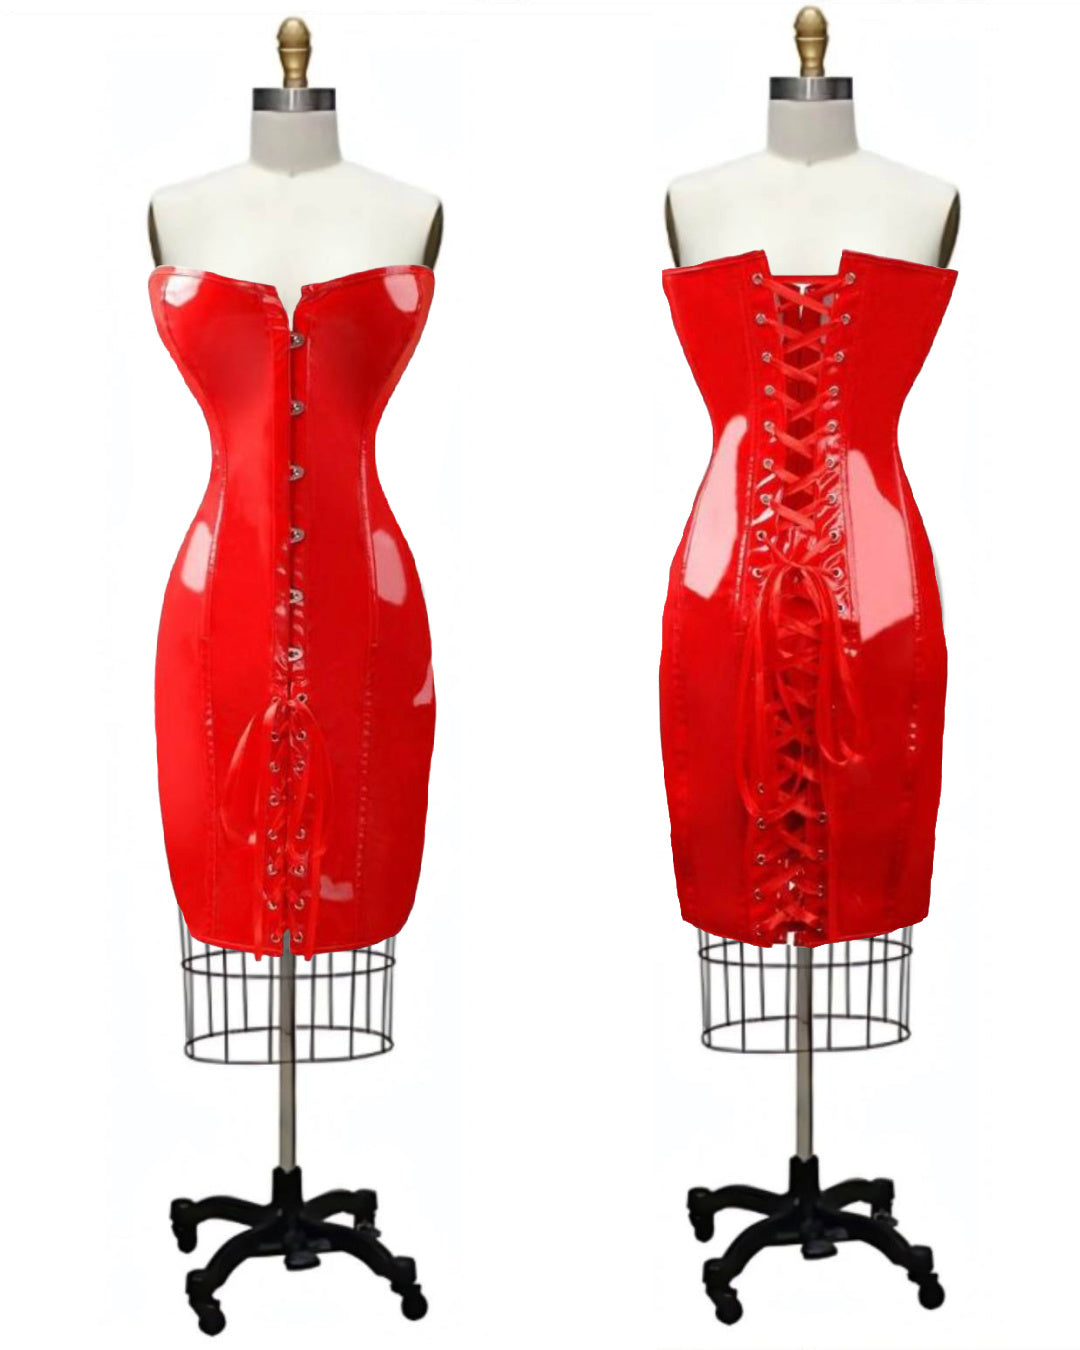 Whittled- the Latex Corset Dress in Black or Red